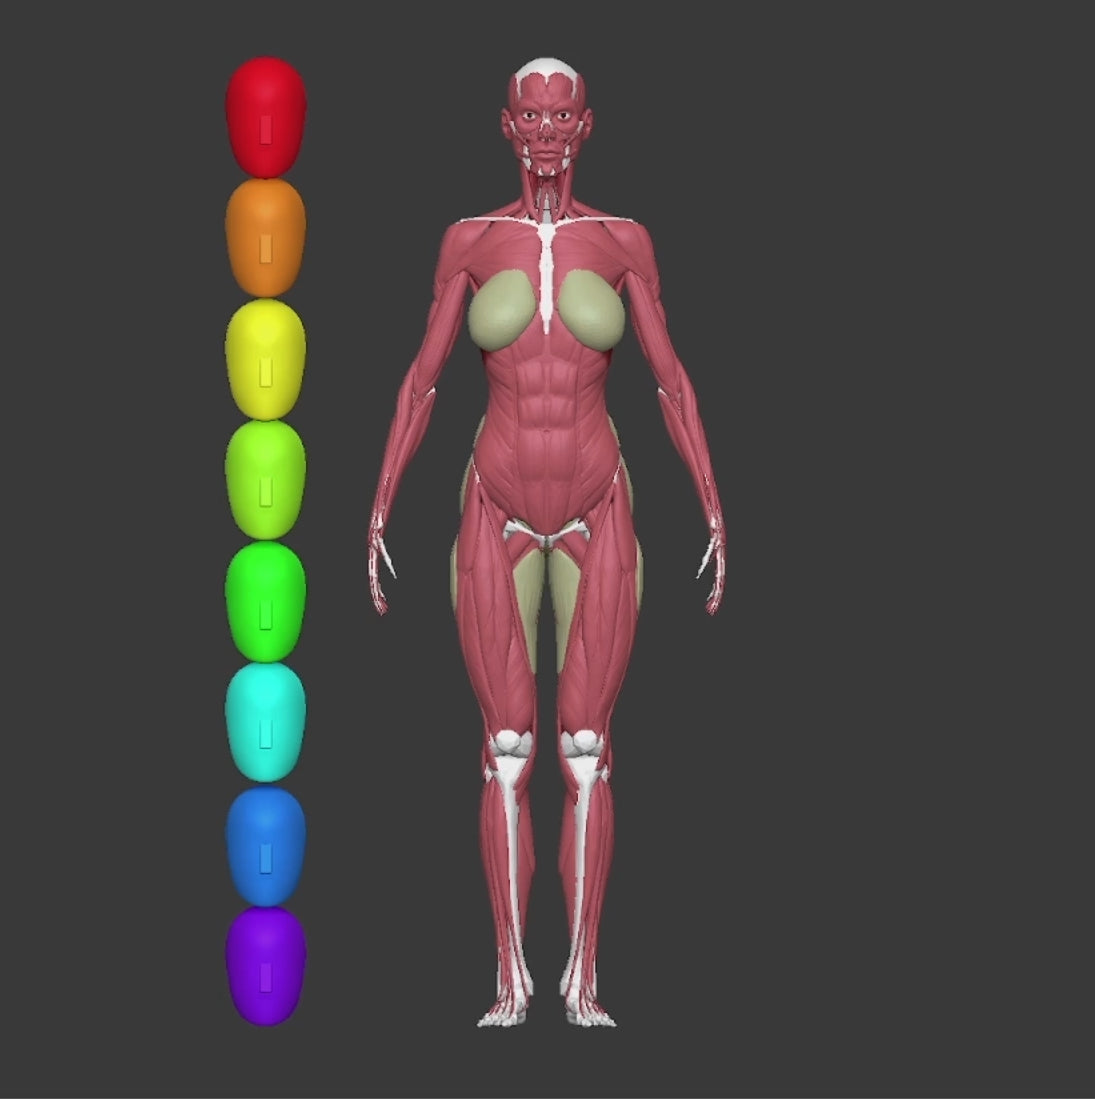 Anatomical Proportions and Landmarks of the Human Body